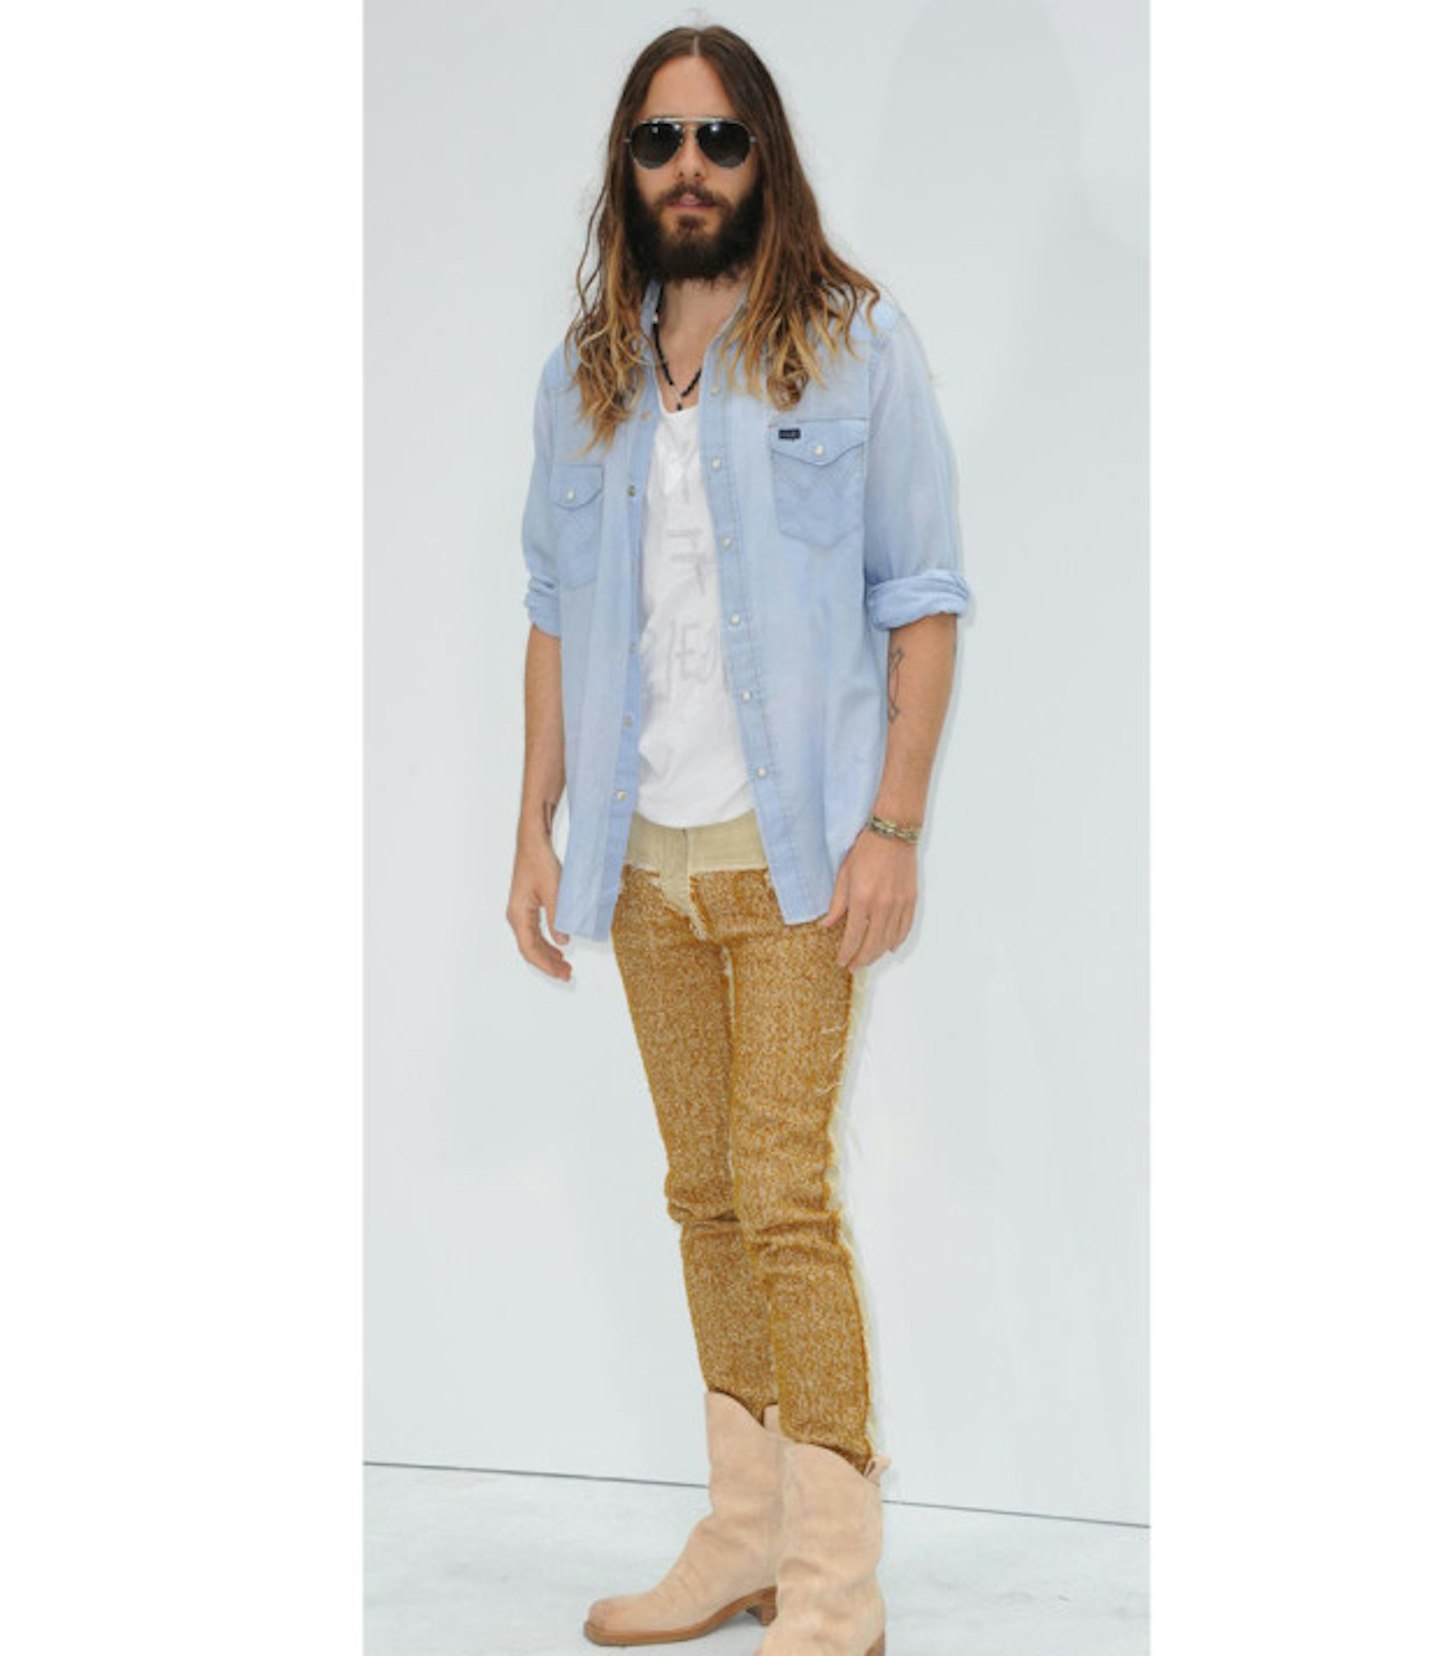 jared-leto-chanel-couture-show-aw-14-blue-shirt-cowboy-boots